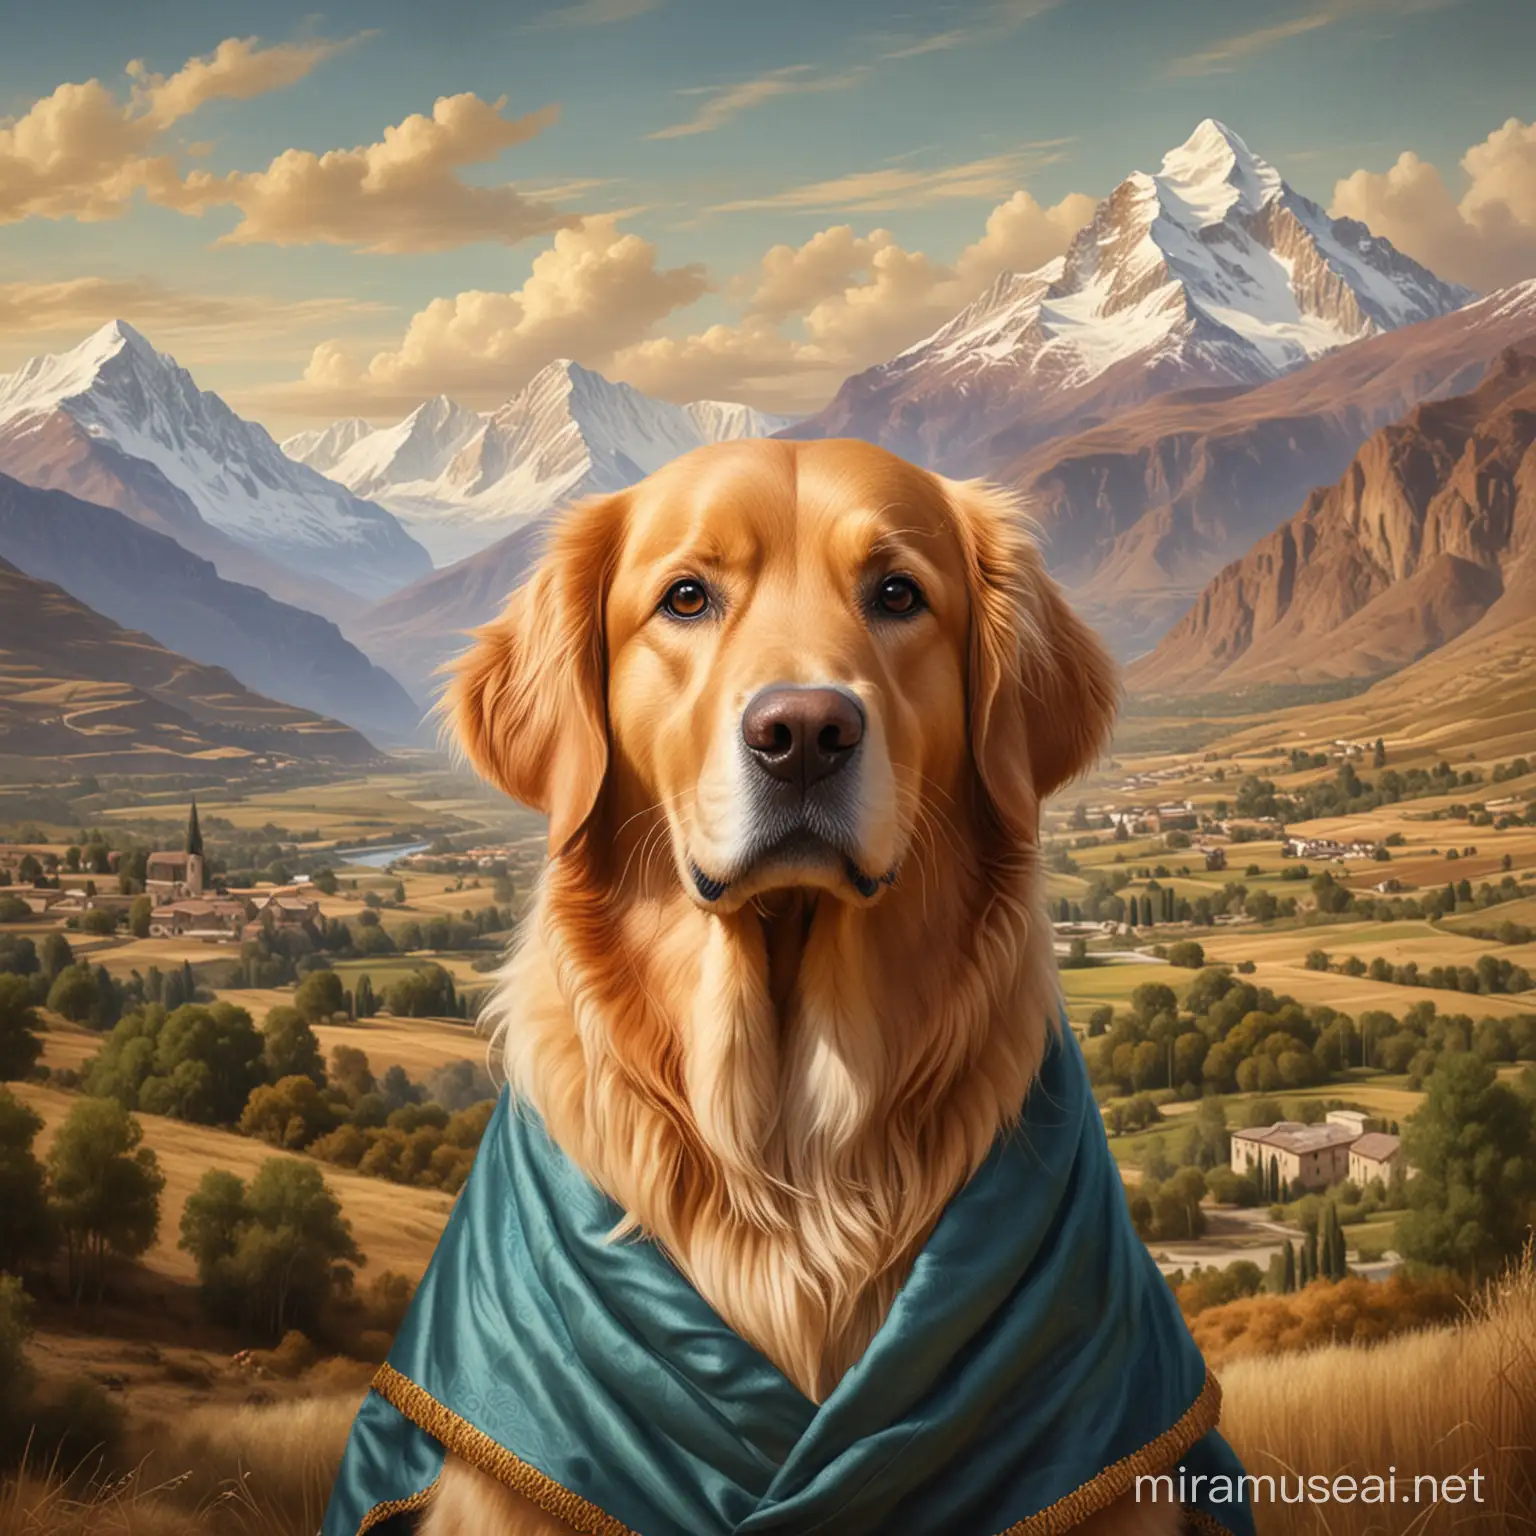 create a portrait of a golden retriever dog, La Gioconda style, Andes mountains on background